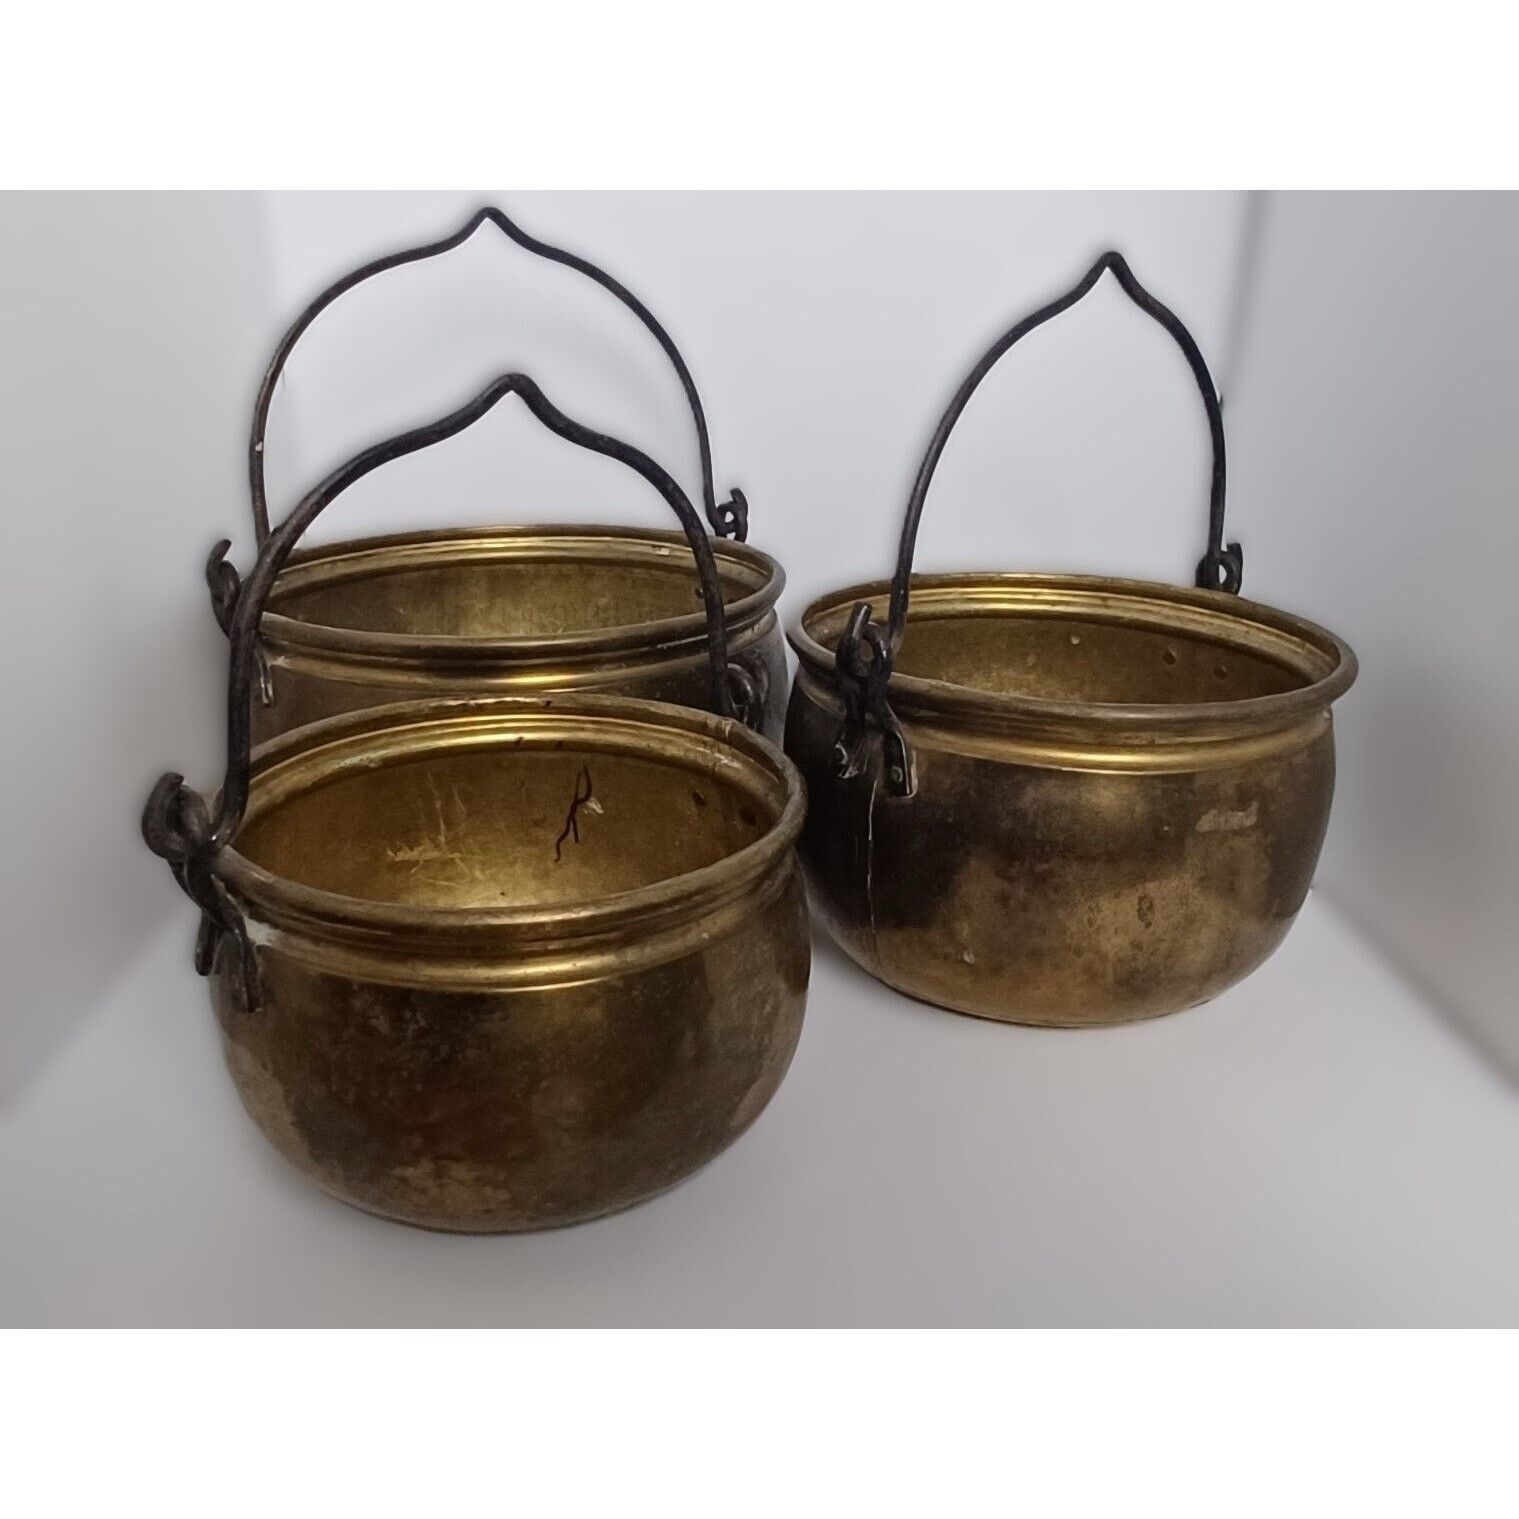 Early 1900s Antique Set of 3 Brass over Copper Pots Planters with Handles